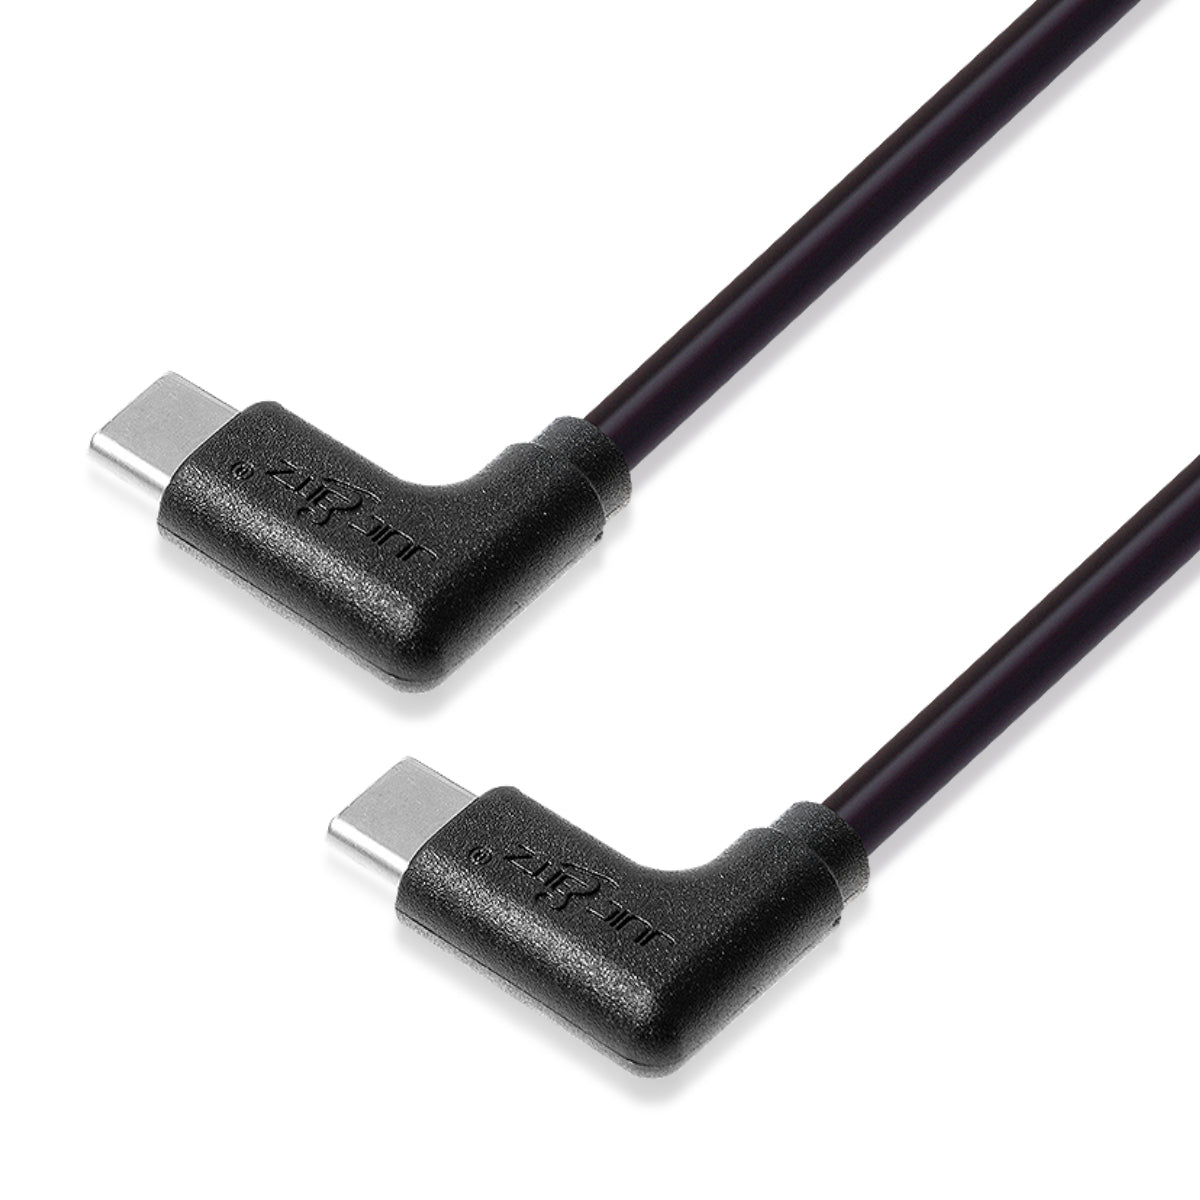 USB-C to USB-C Angled 3A Charger Cable USB 2.0 Data Transfer Lead - Black